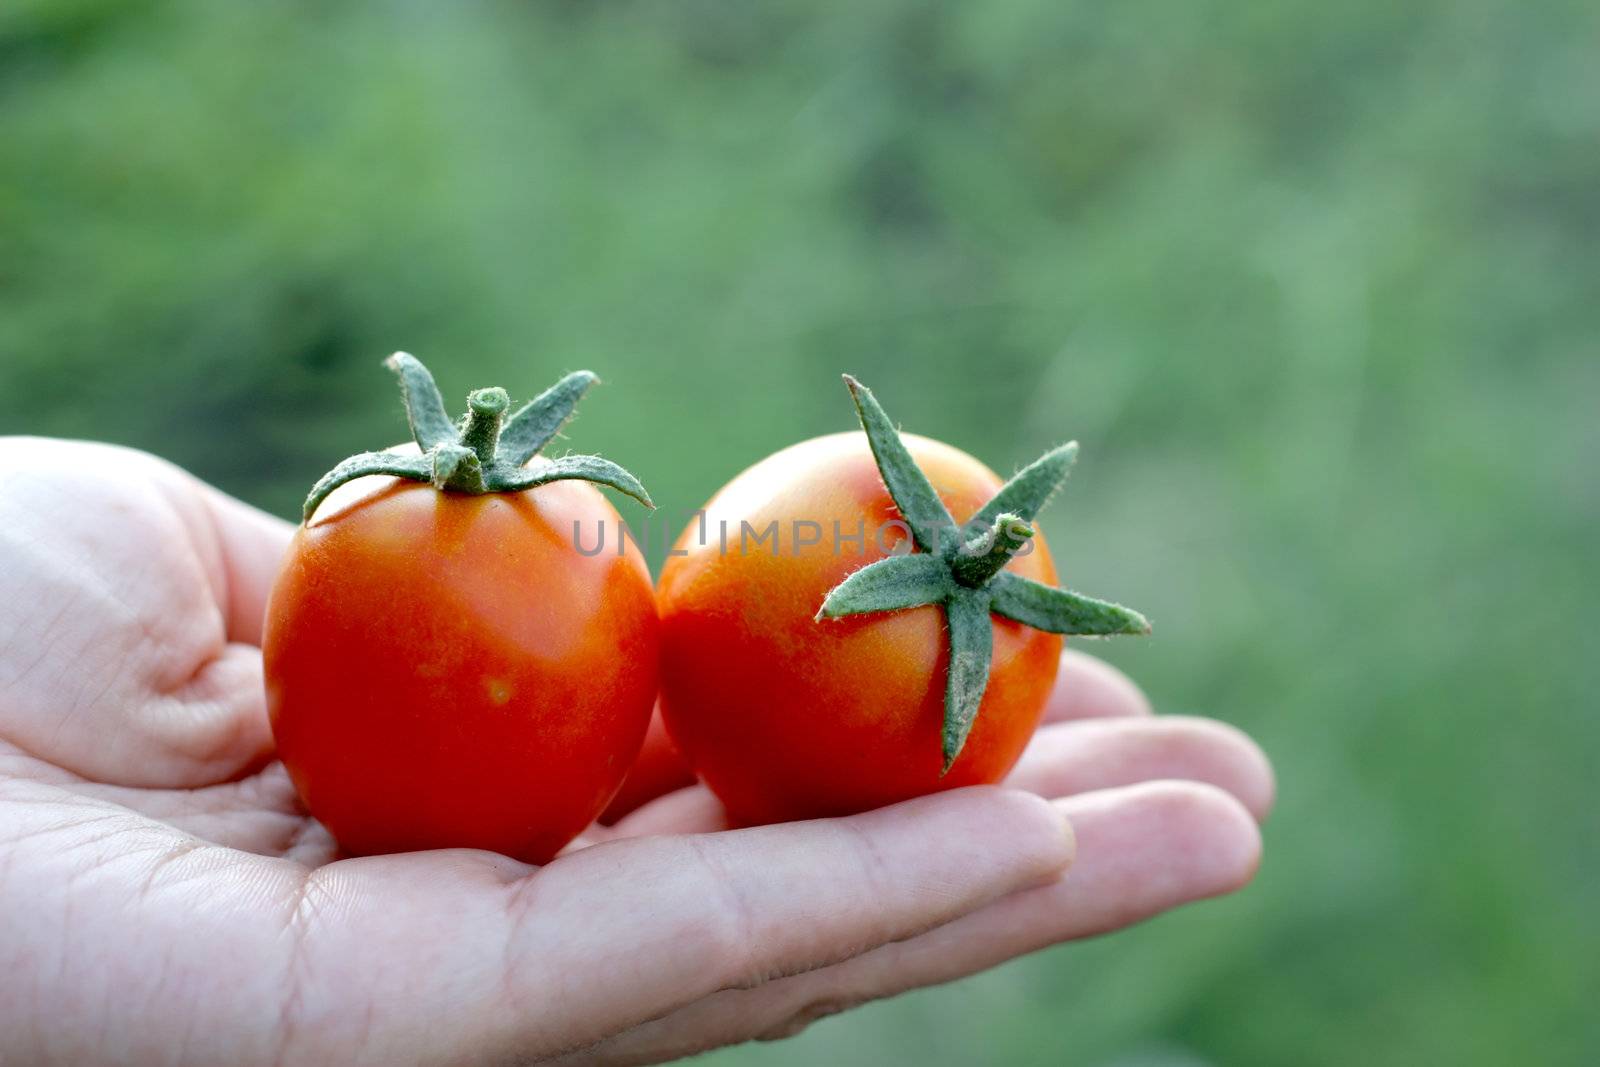 Tomatoes on the palm. Shallow DOF.